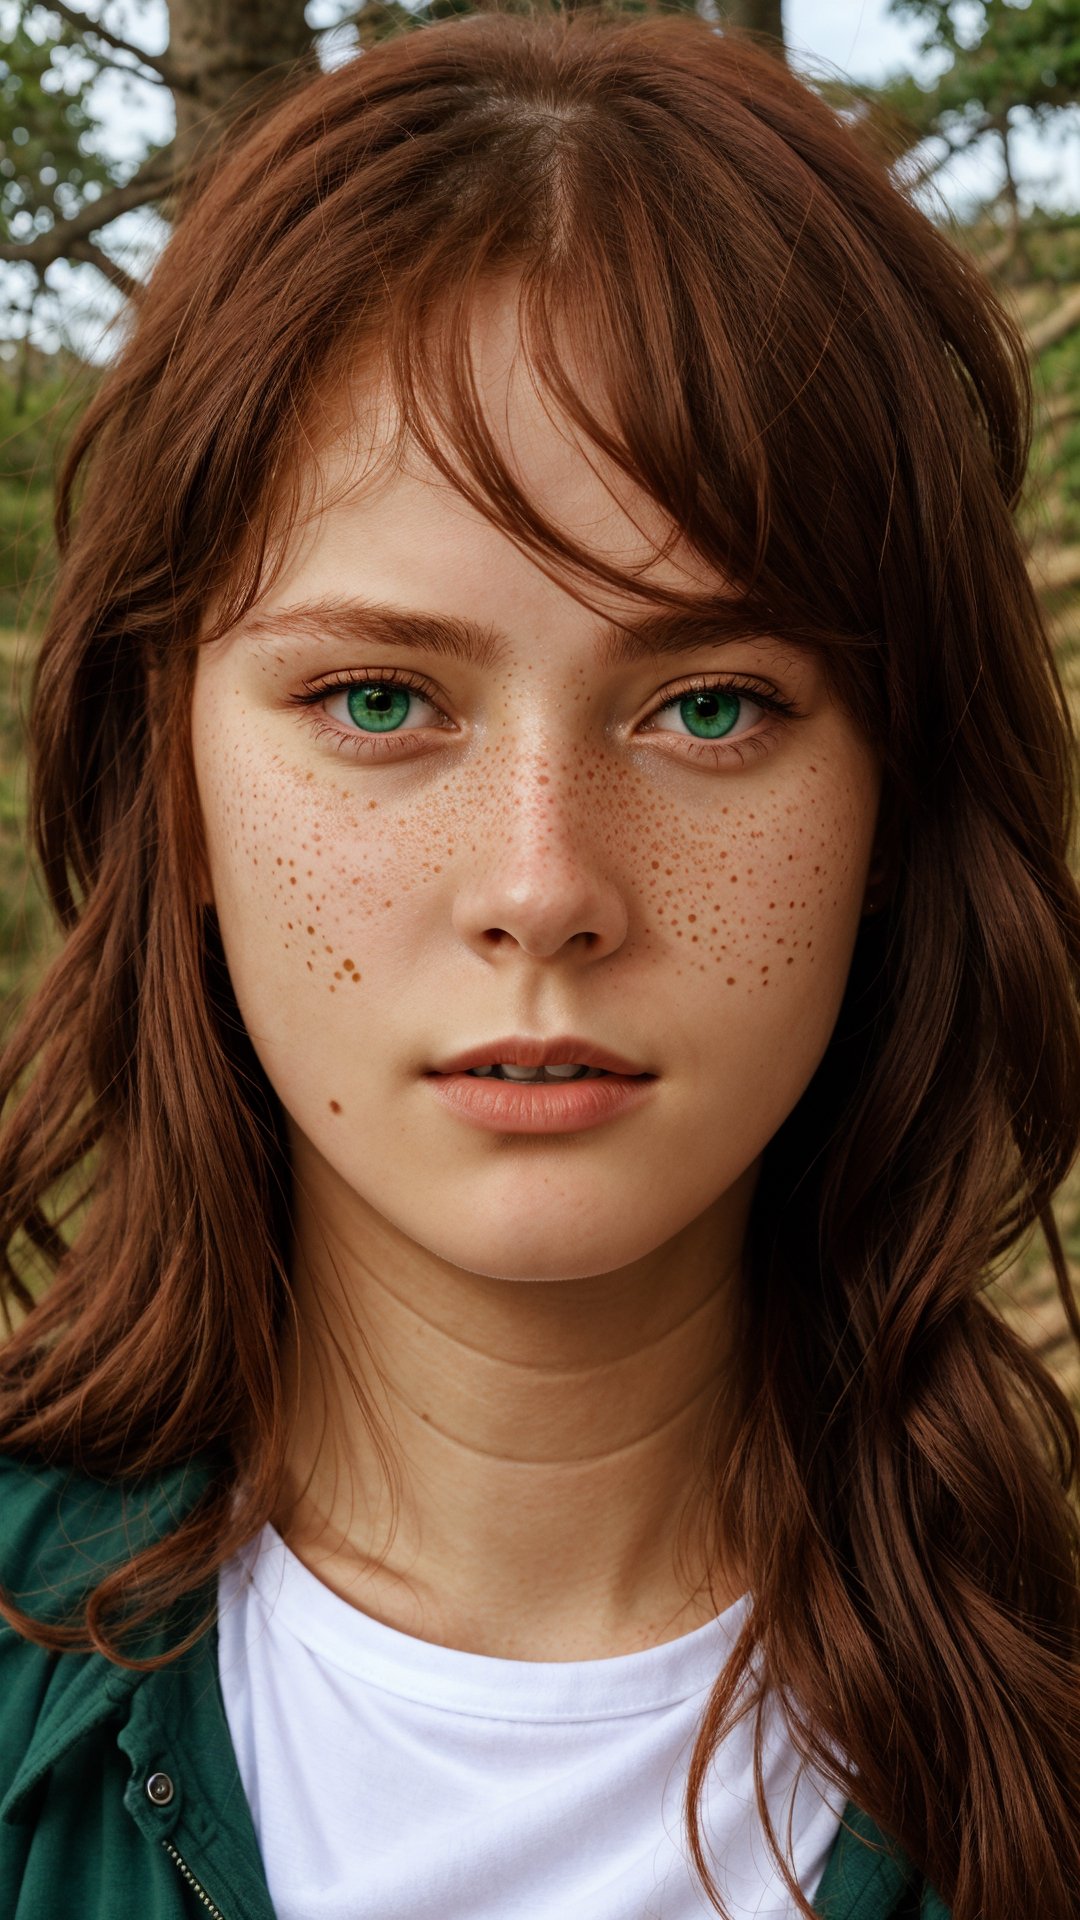 8k, ultrarealstic, woman, redhead, slim, fine facial features, green eyes, freckles, 8-bit